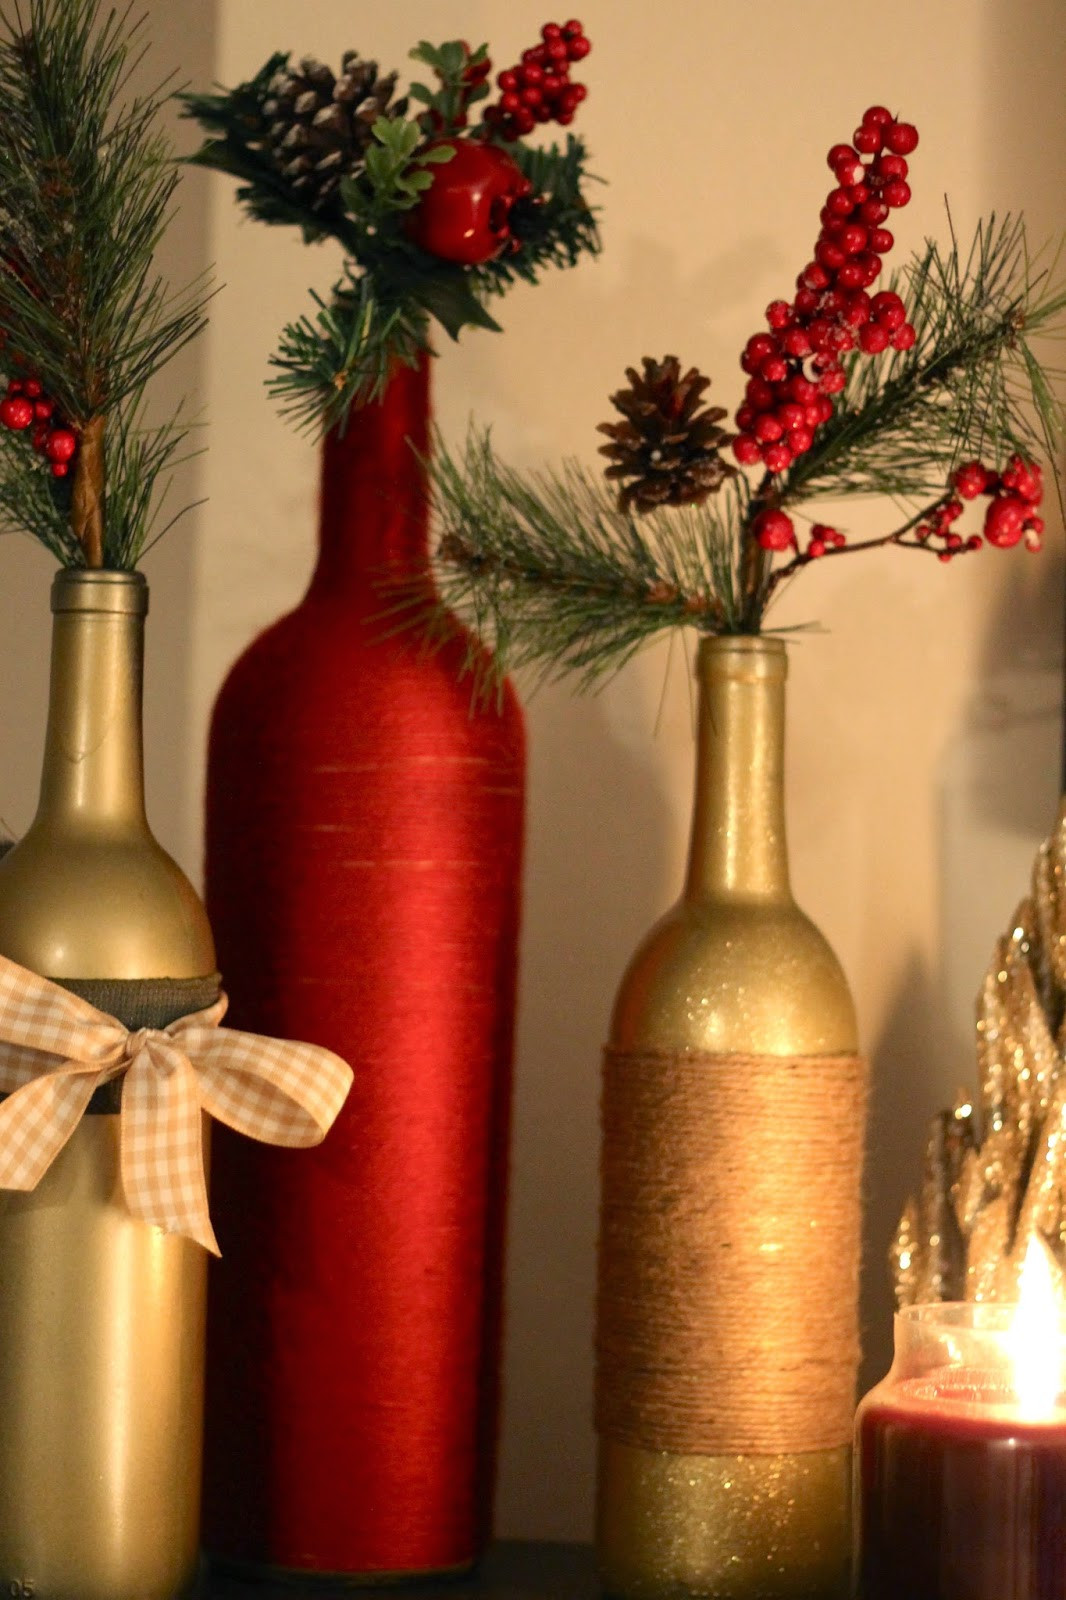 DIY Wine Bottle Decorations
 DIY Holiday Wine Bottles Pretty in the Pines North